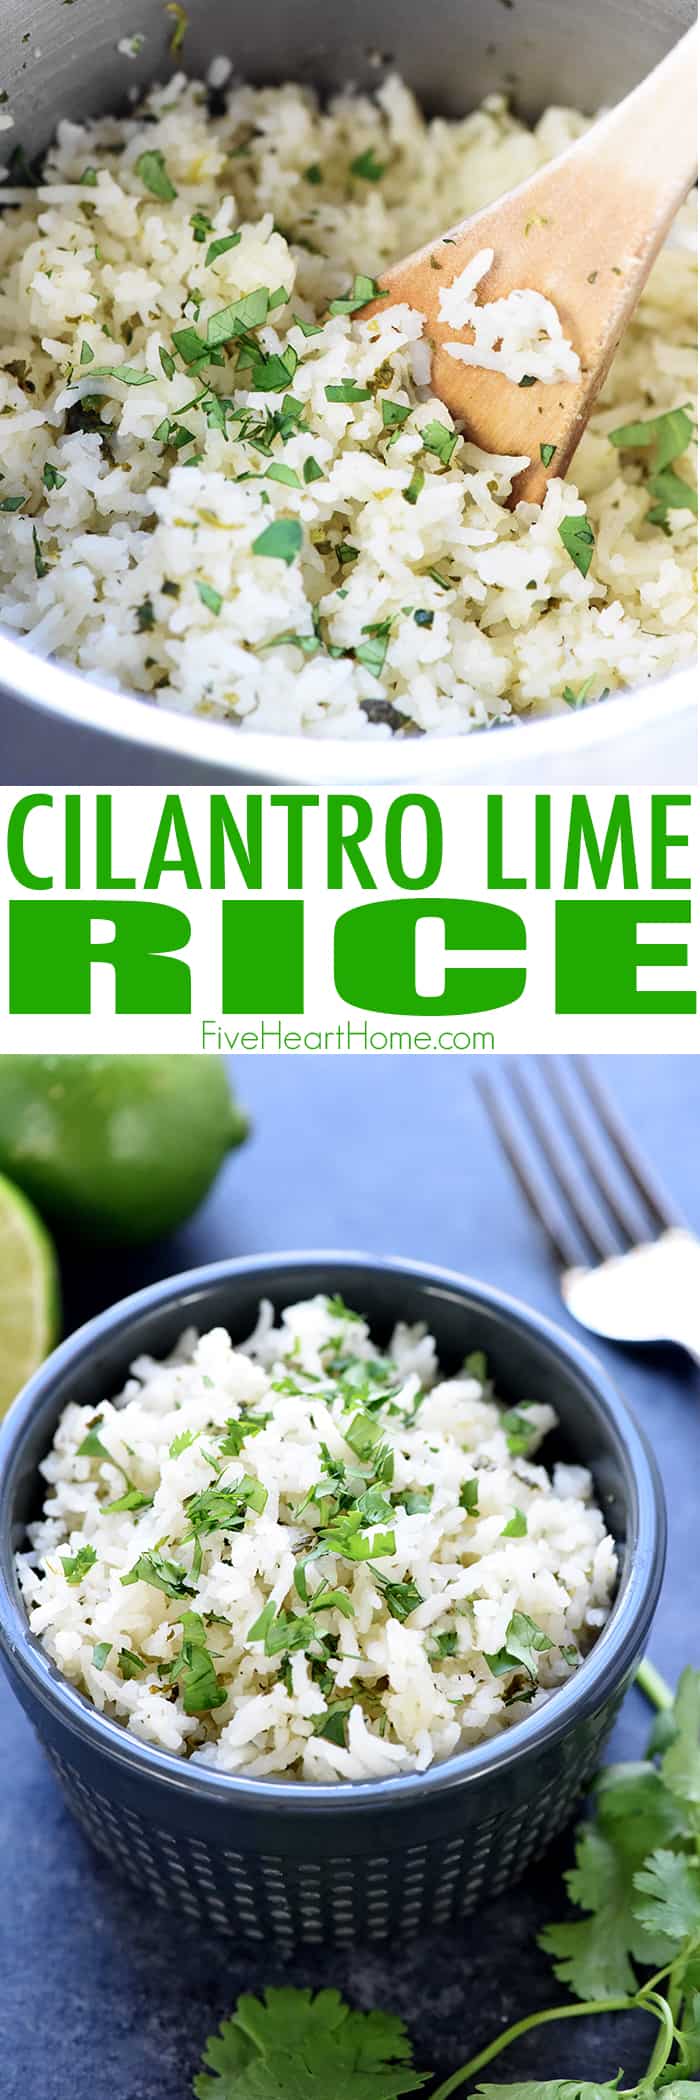 Cilantro Lime Rice ~ with just a handful of ingredients, this easy, tasty recipe is the perfect base for burrito bowls or a delicious side for all of your favorite Mexican entrees! | FiveHeartHome.com via @fivehearthome